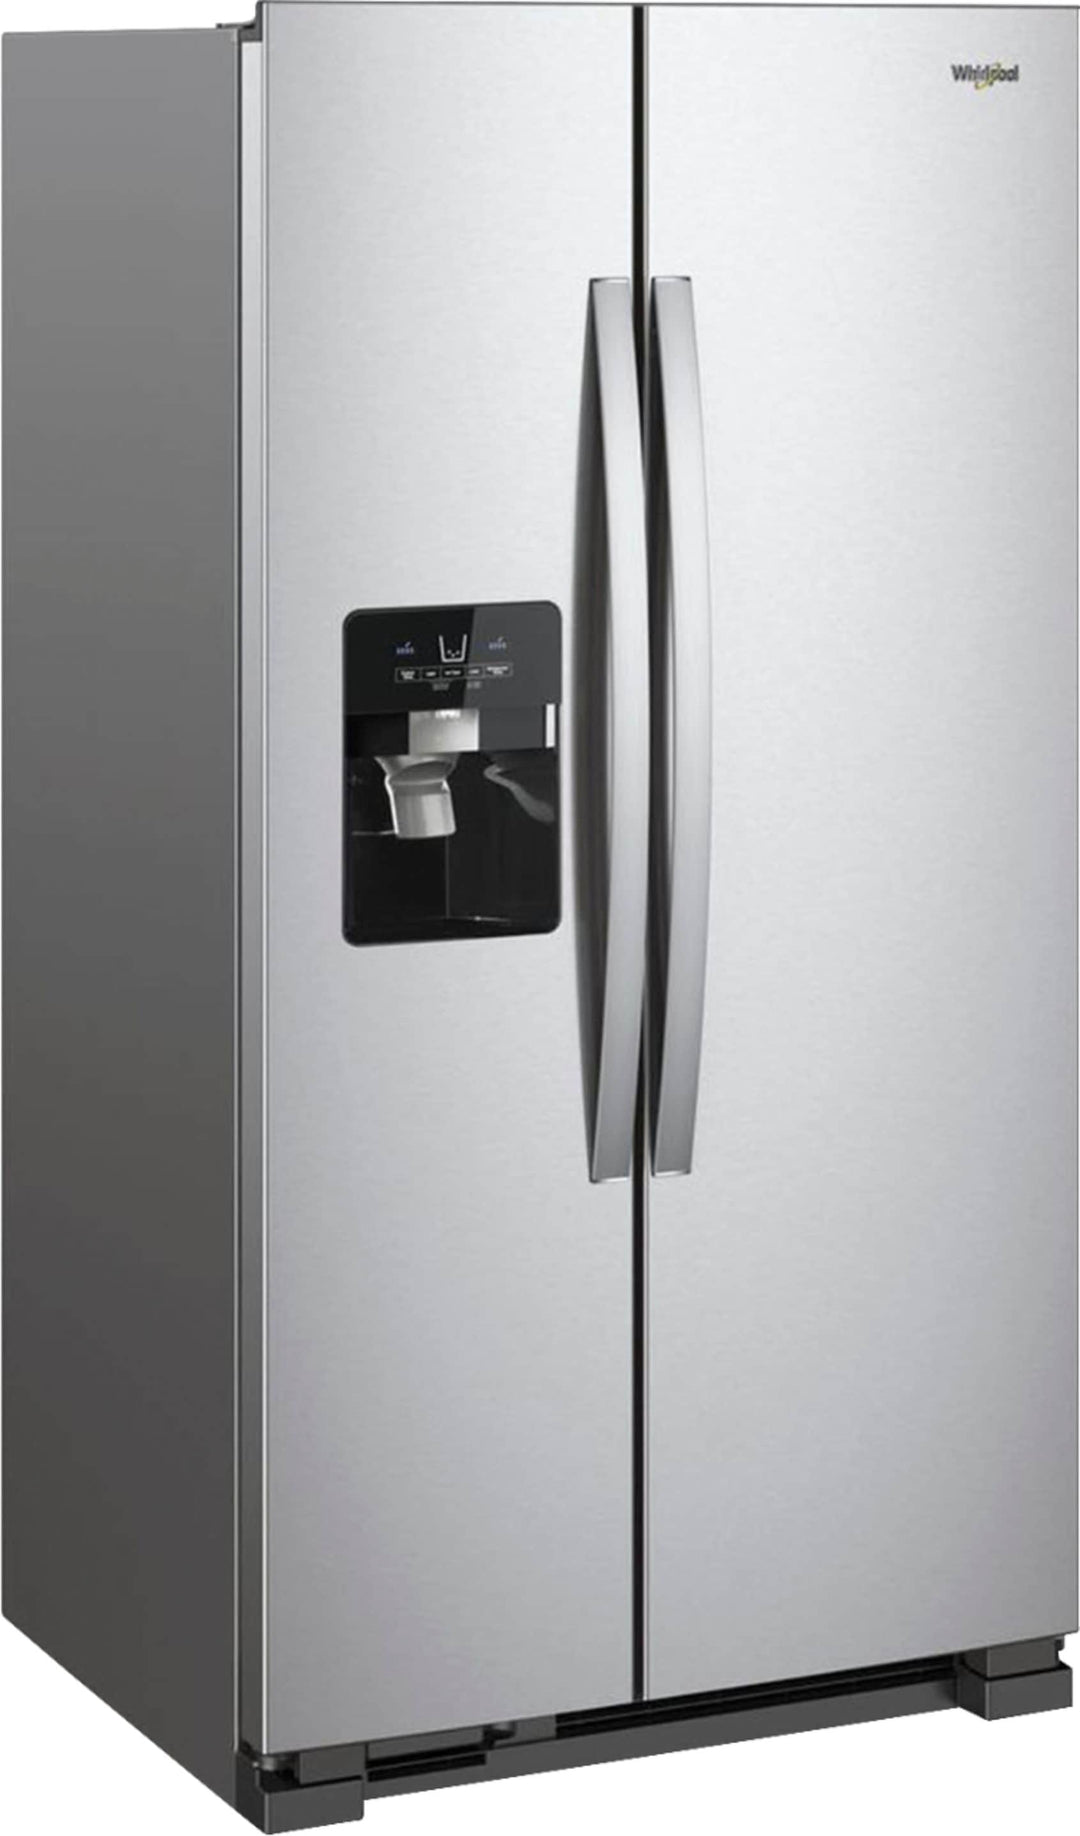 Whirlpool - 24.6 Cu. Ft. Side-by-Side Refrigerator - Stainless steel_1